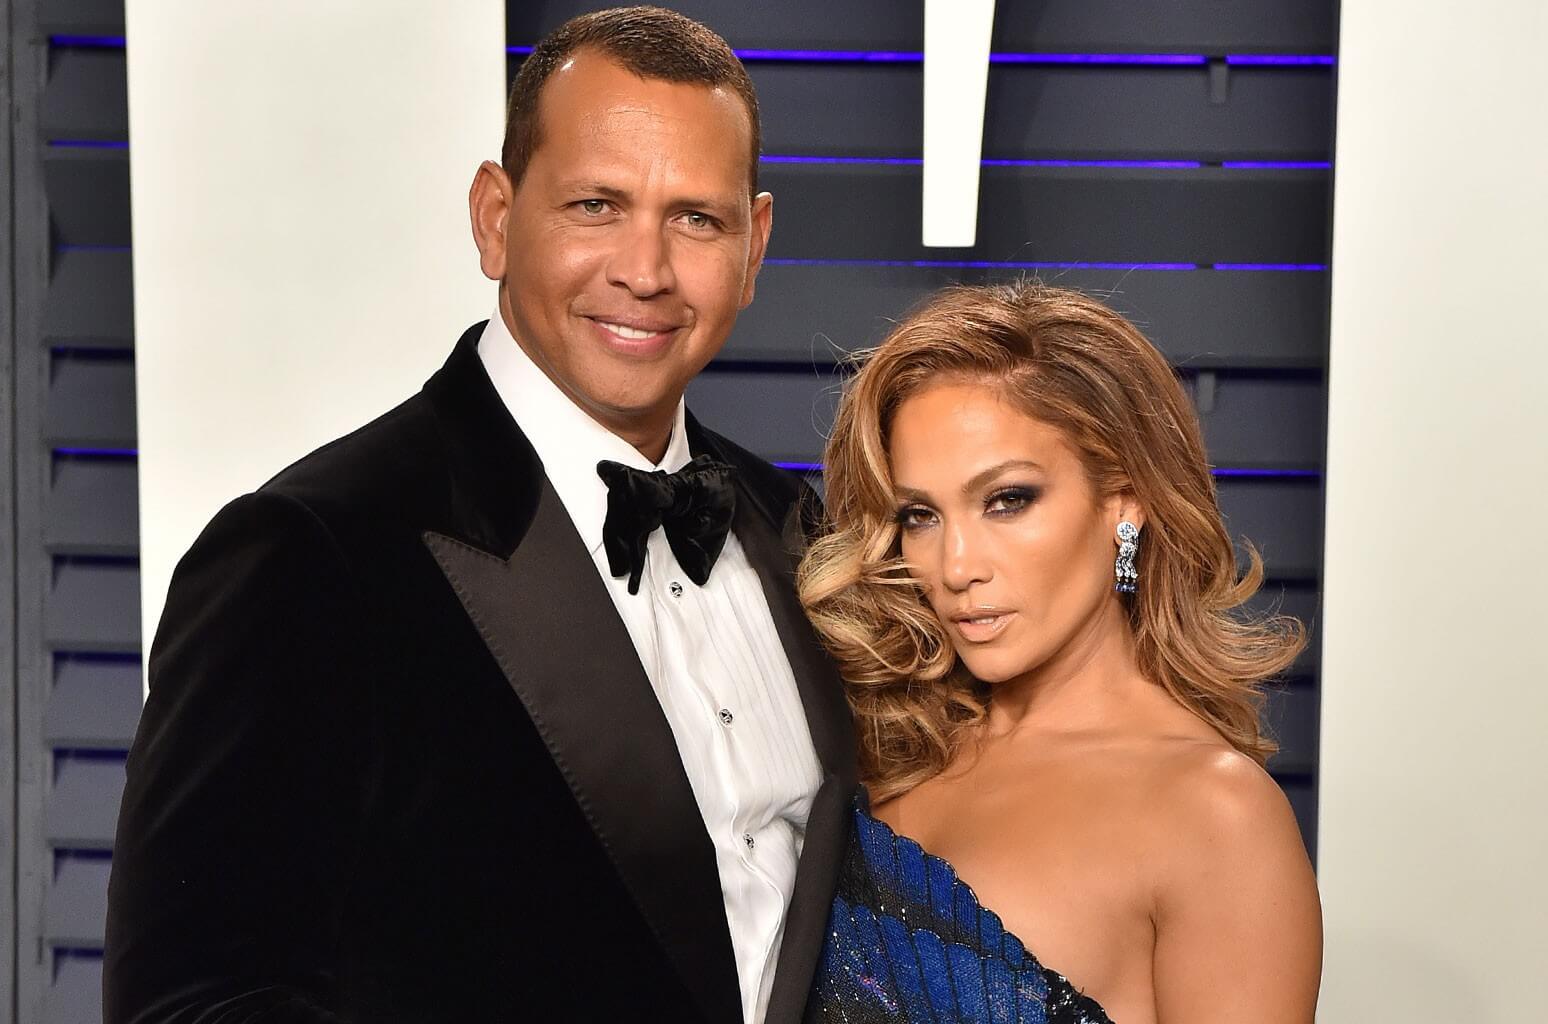 Madison LeCroy Breaks Her Silence After Causing A-Rod & J-Lo Breakup!